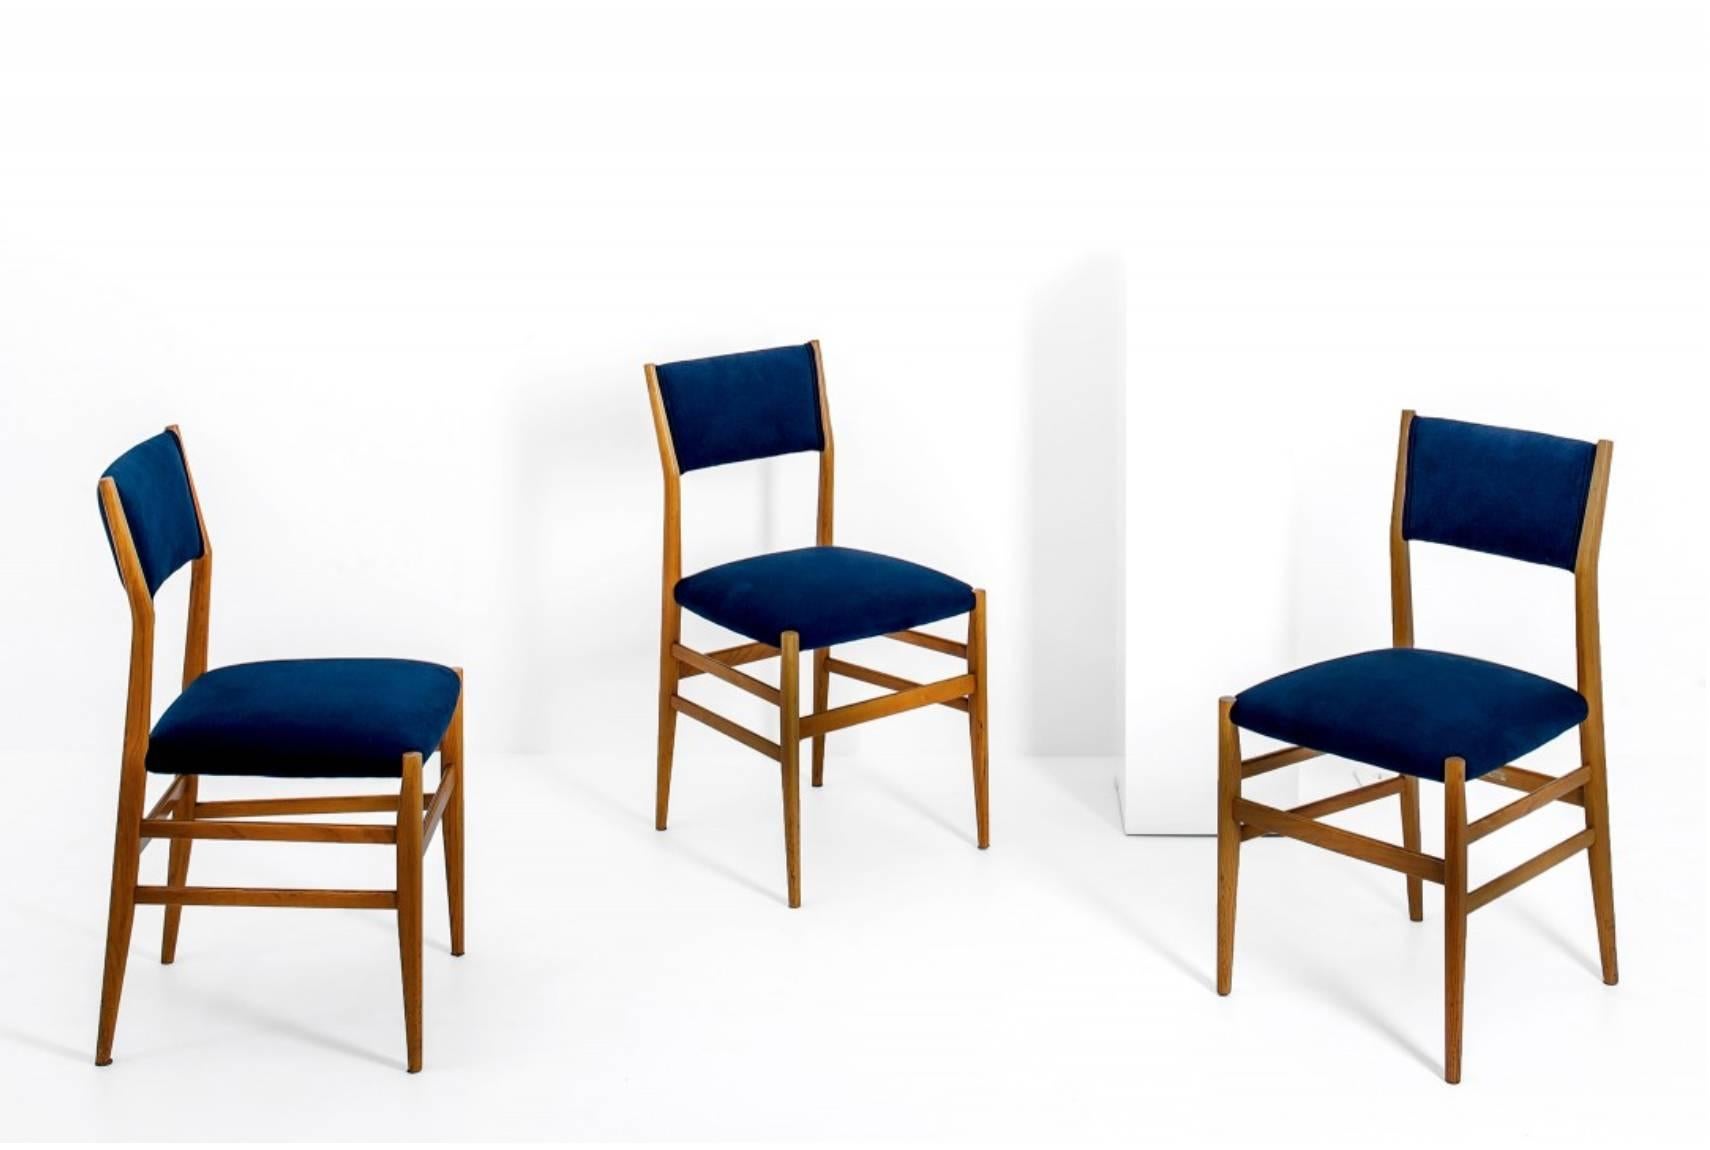 Gio Ponti (1891-1979)

Set of four dining chairs, model 